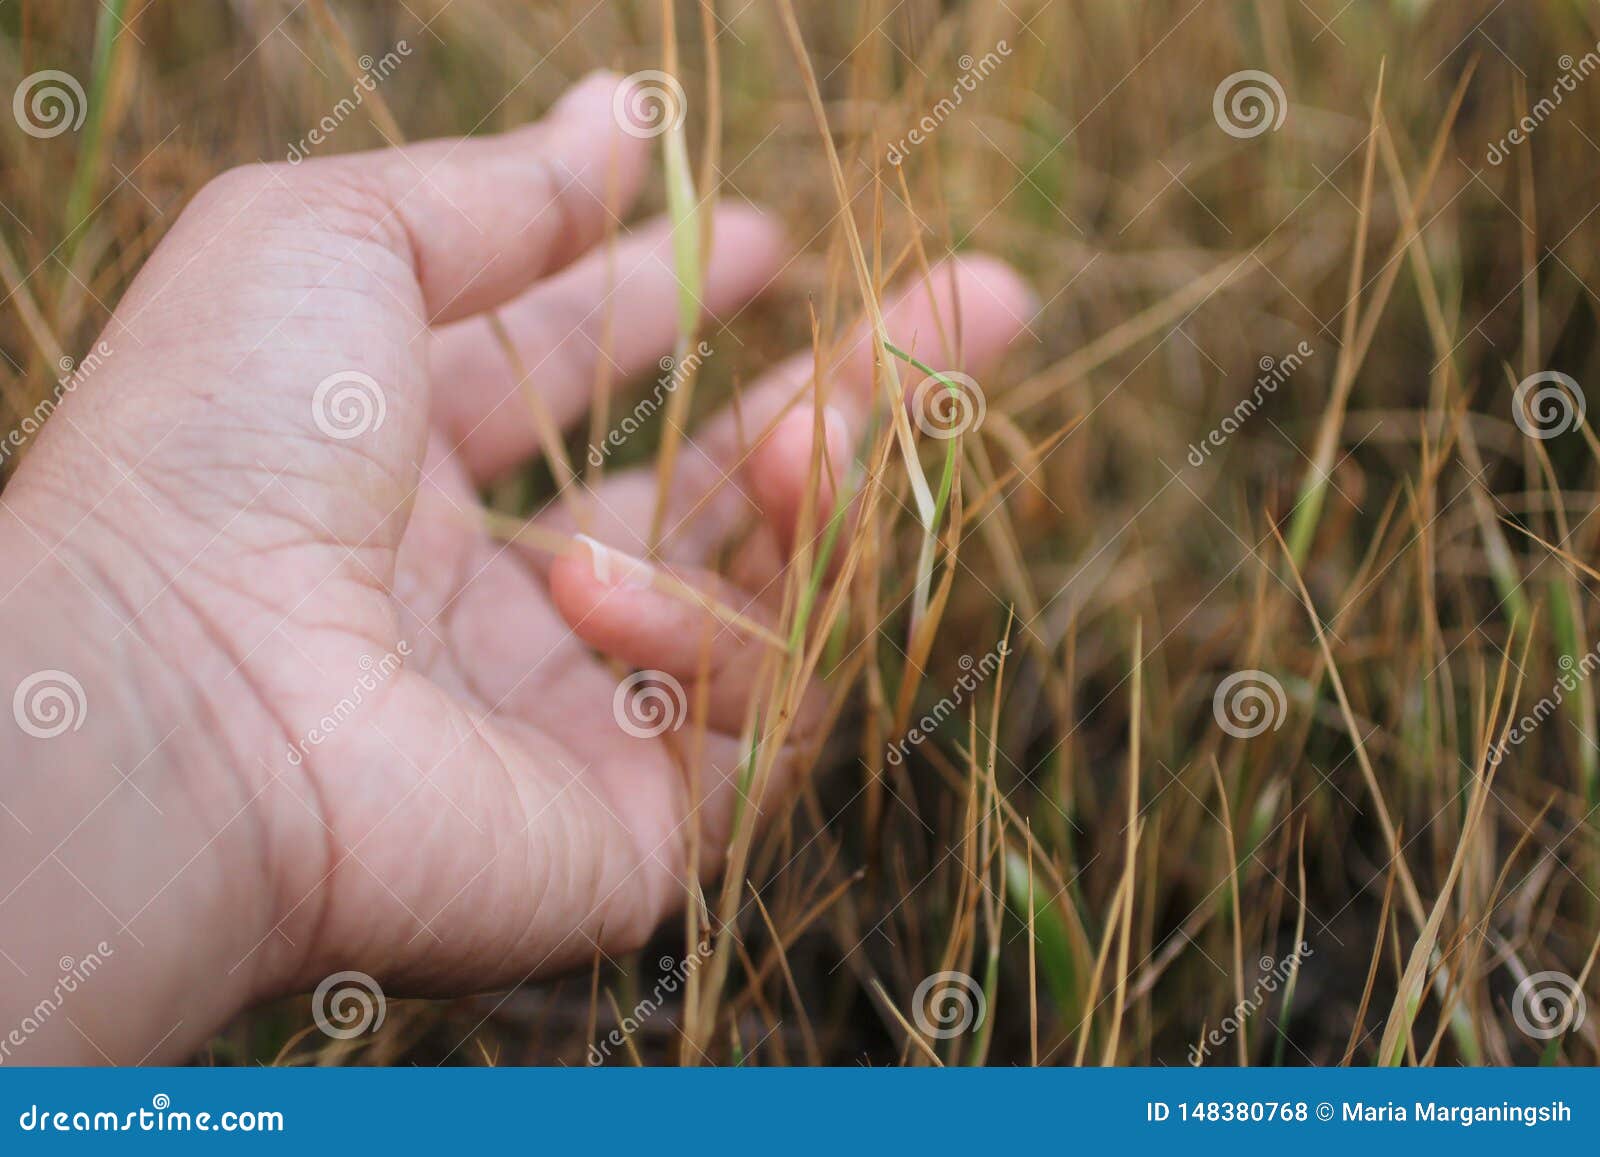 human hand and nature concept. a hand touched the barren grass.